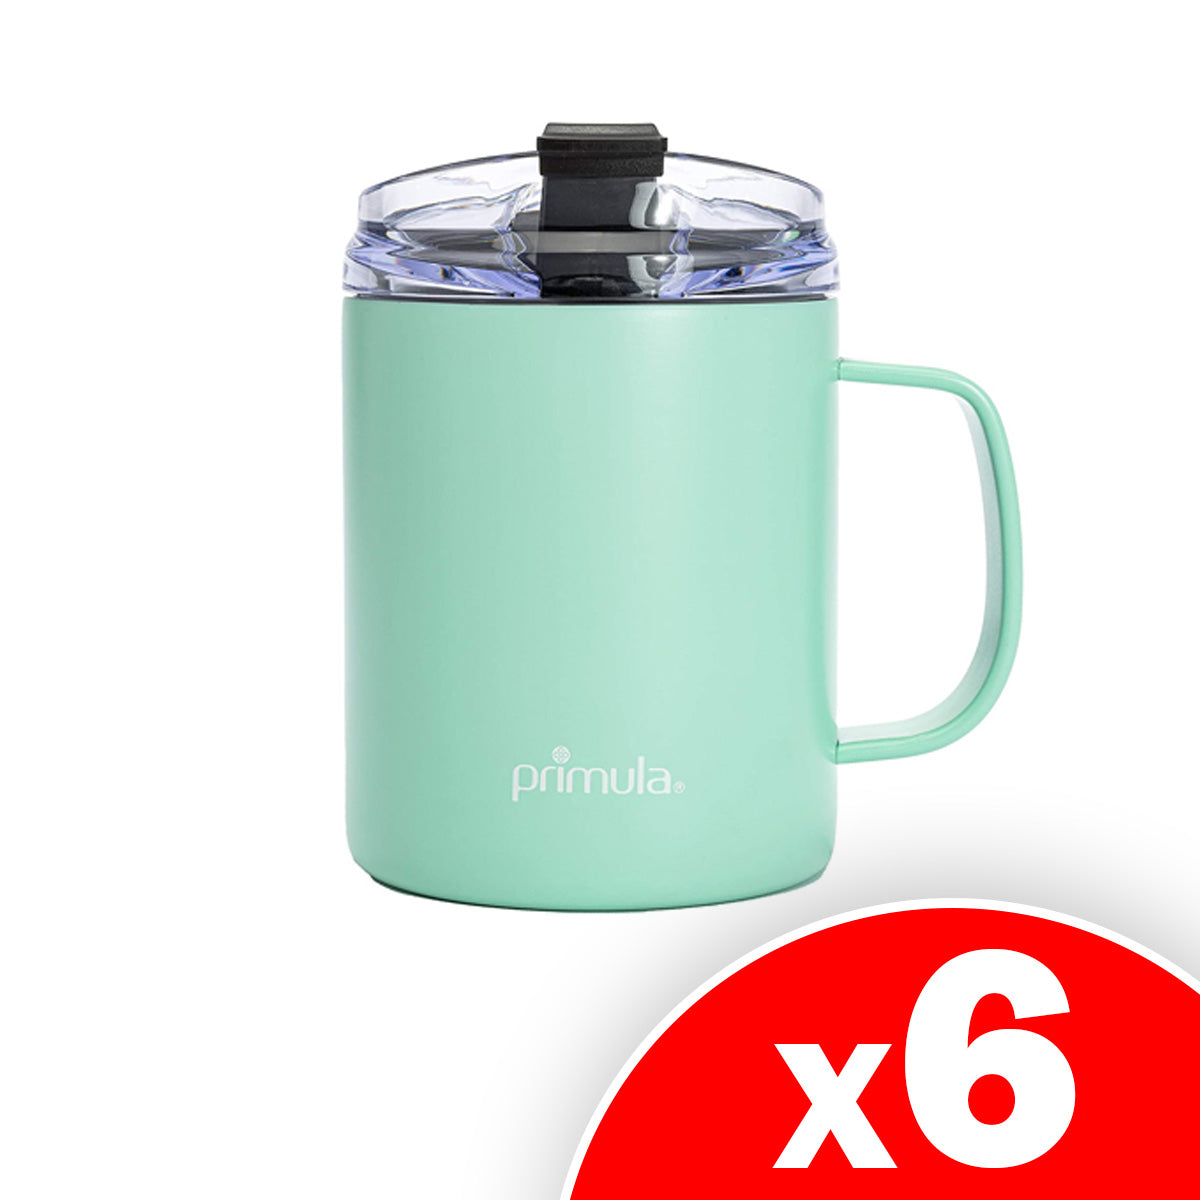 Primula Insulated Mugs With Lid, 14 Oz. - Teal, 6 Pack